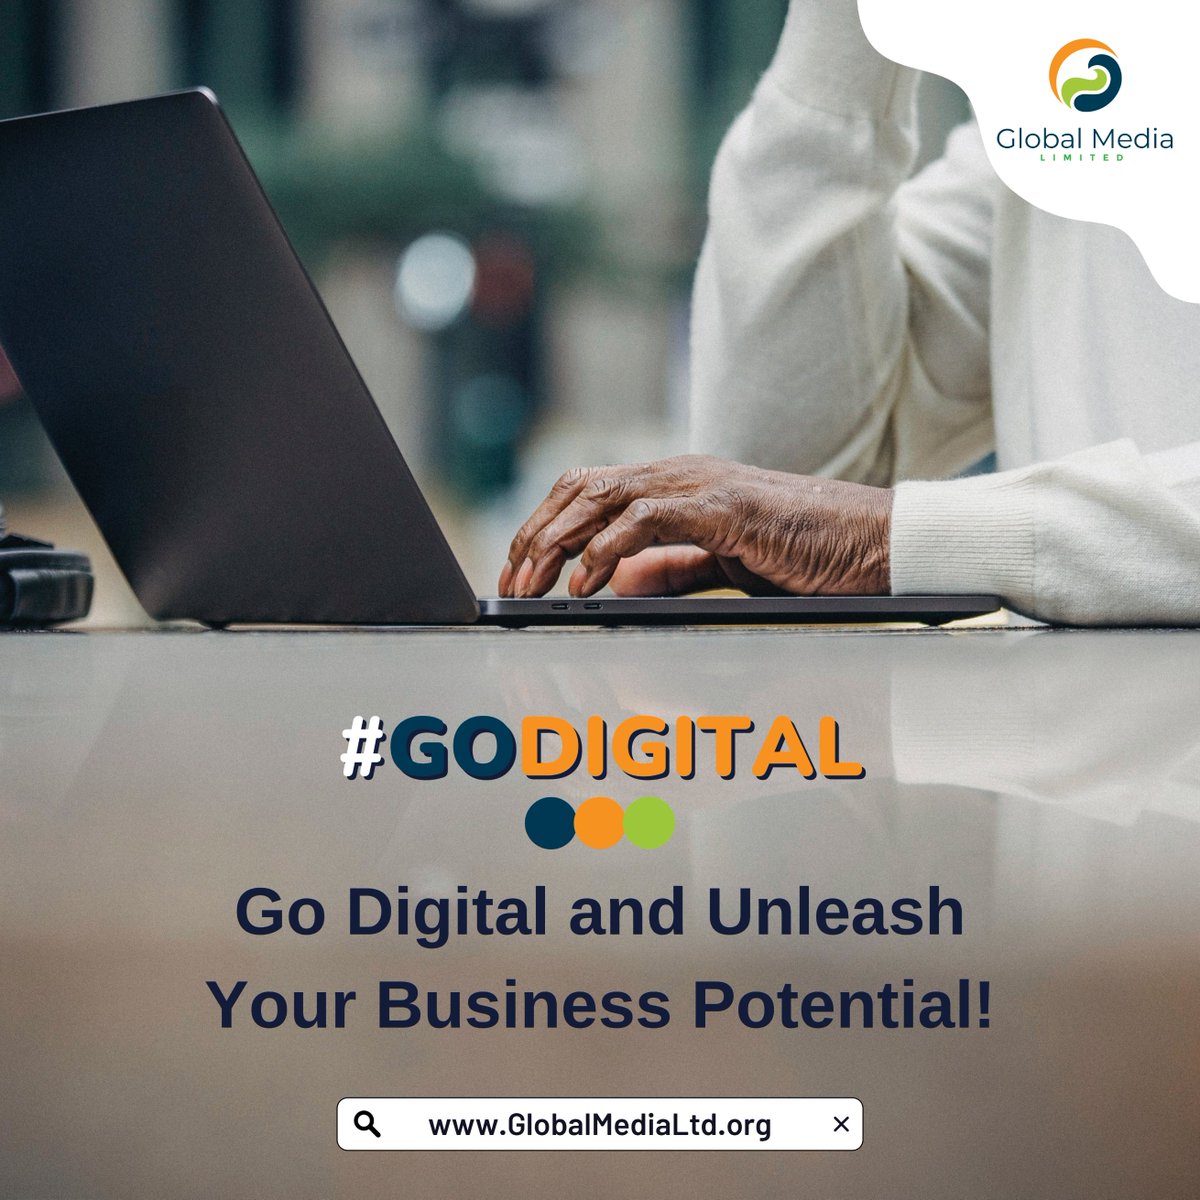 It's time to level up your digital game! Join the Go Digital movement with Global Media Ltd and stay ahead of the competition. @RealGlobalMedia🚀💡 #GoDigital #AskGlobalMediaLtd #GlobalMediaLtd 

#DigitalTransformation #ContentMarketing #Digitalmarketing #WhatIsAWoman